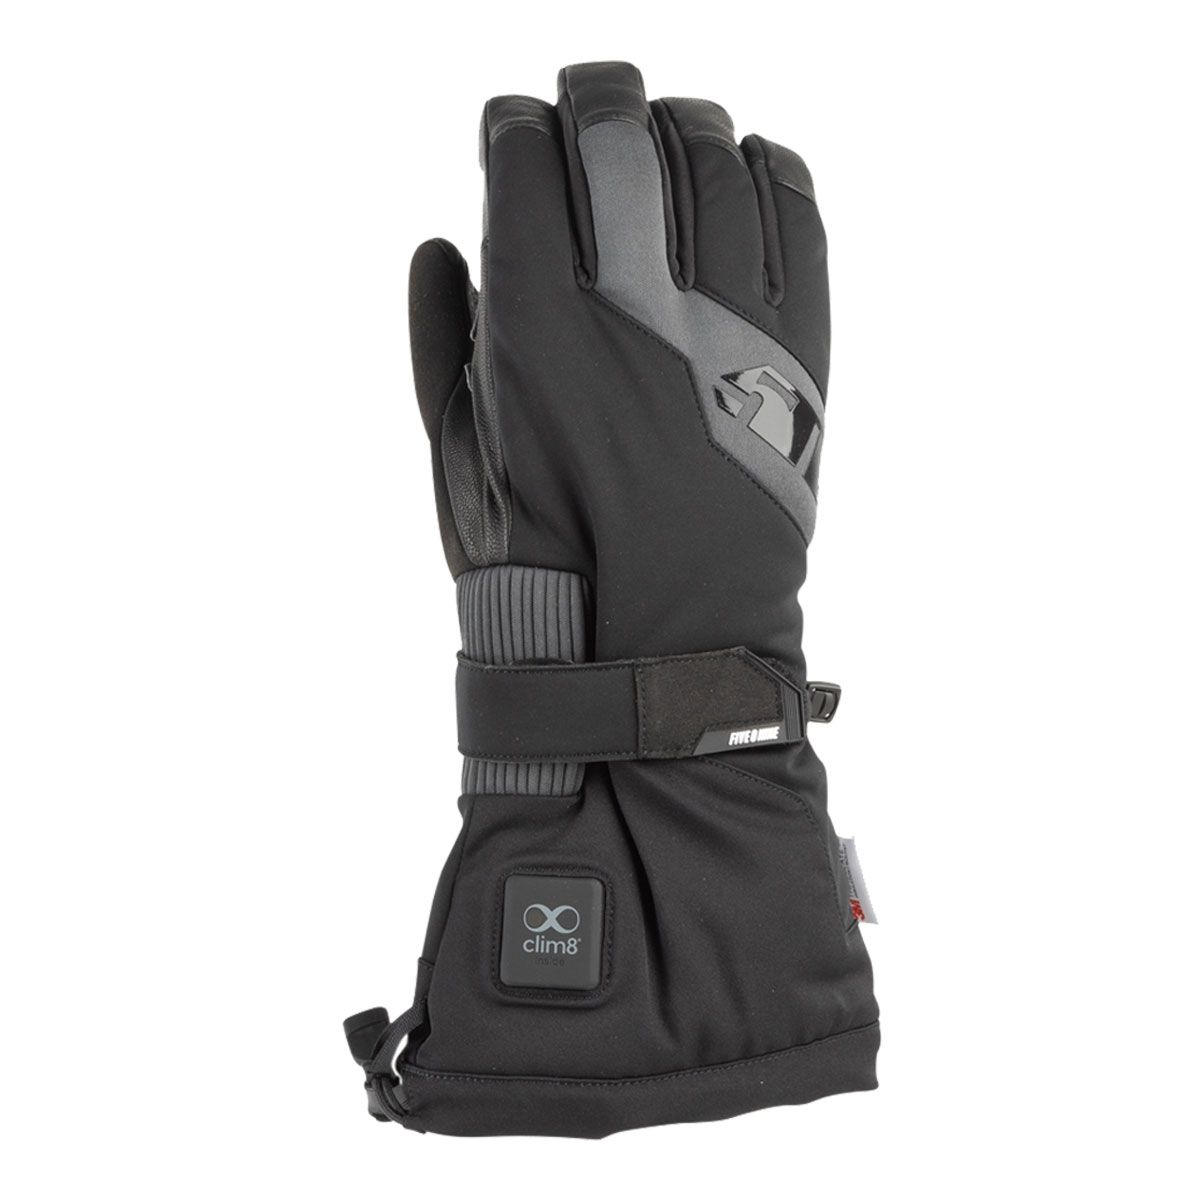 509 gloves adult backcountry ignite gloves - snowmobile